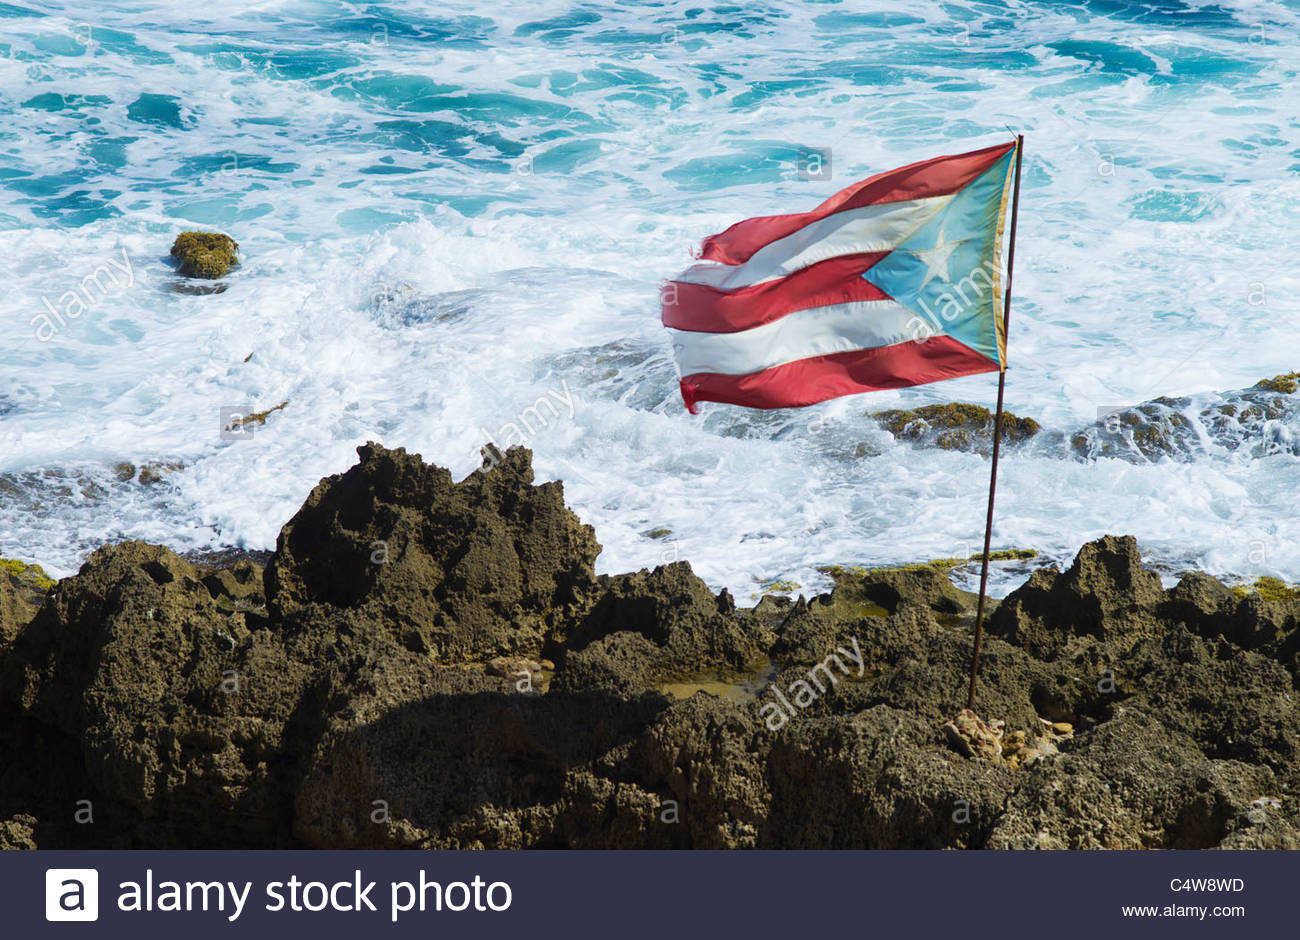 Puerto Rico Old San Juan Rican Flag On Rock With Sea In